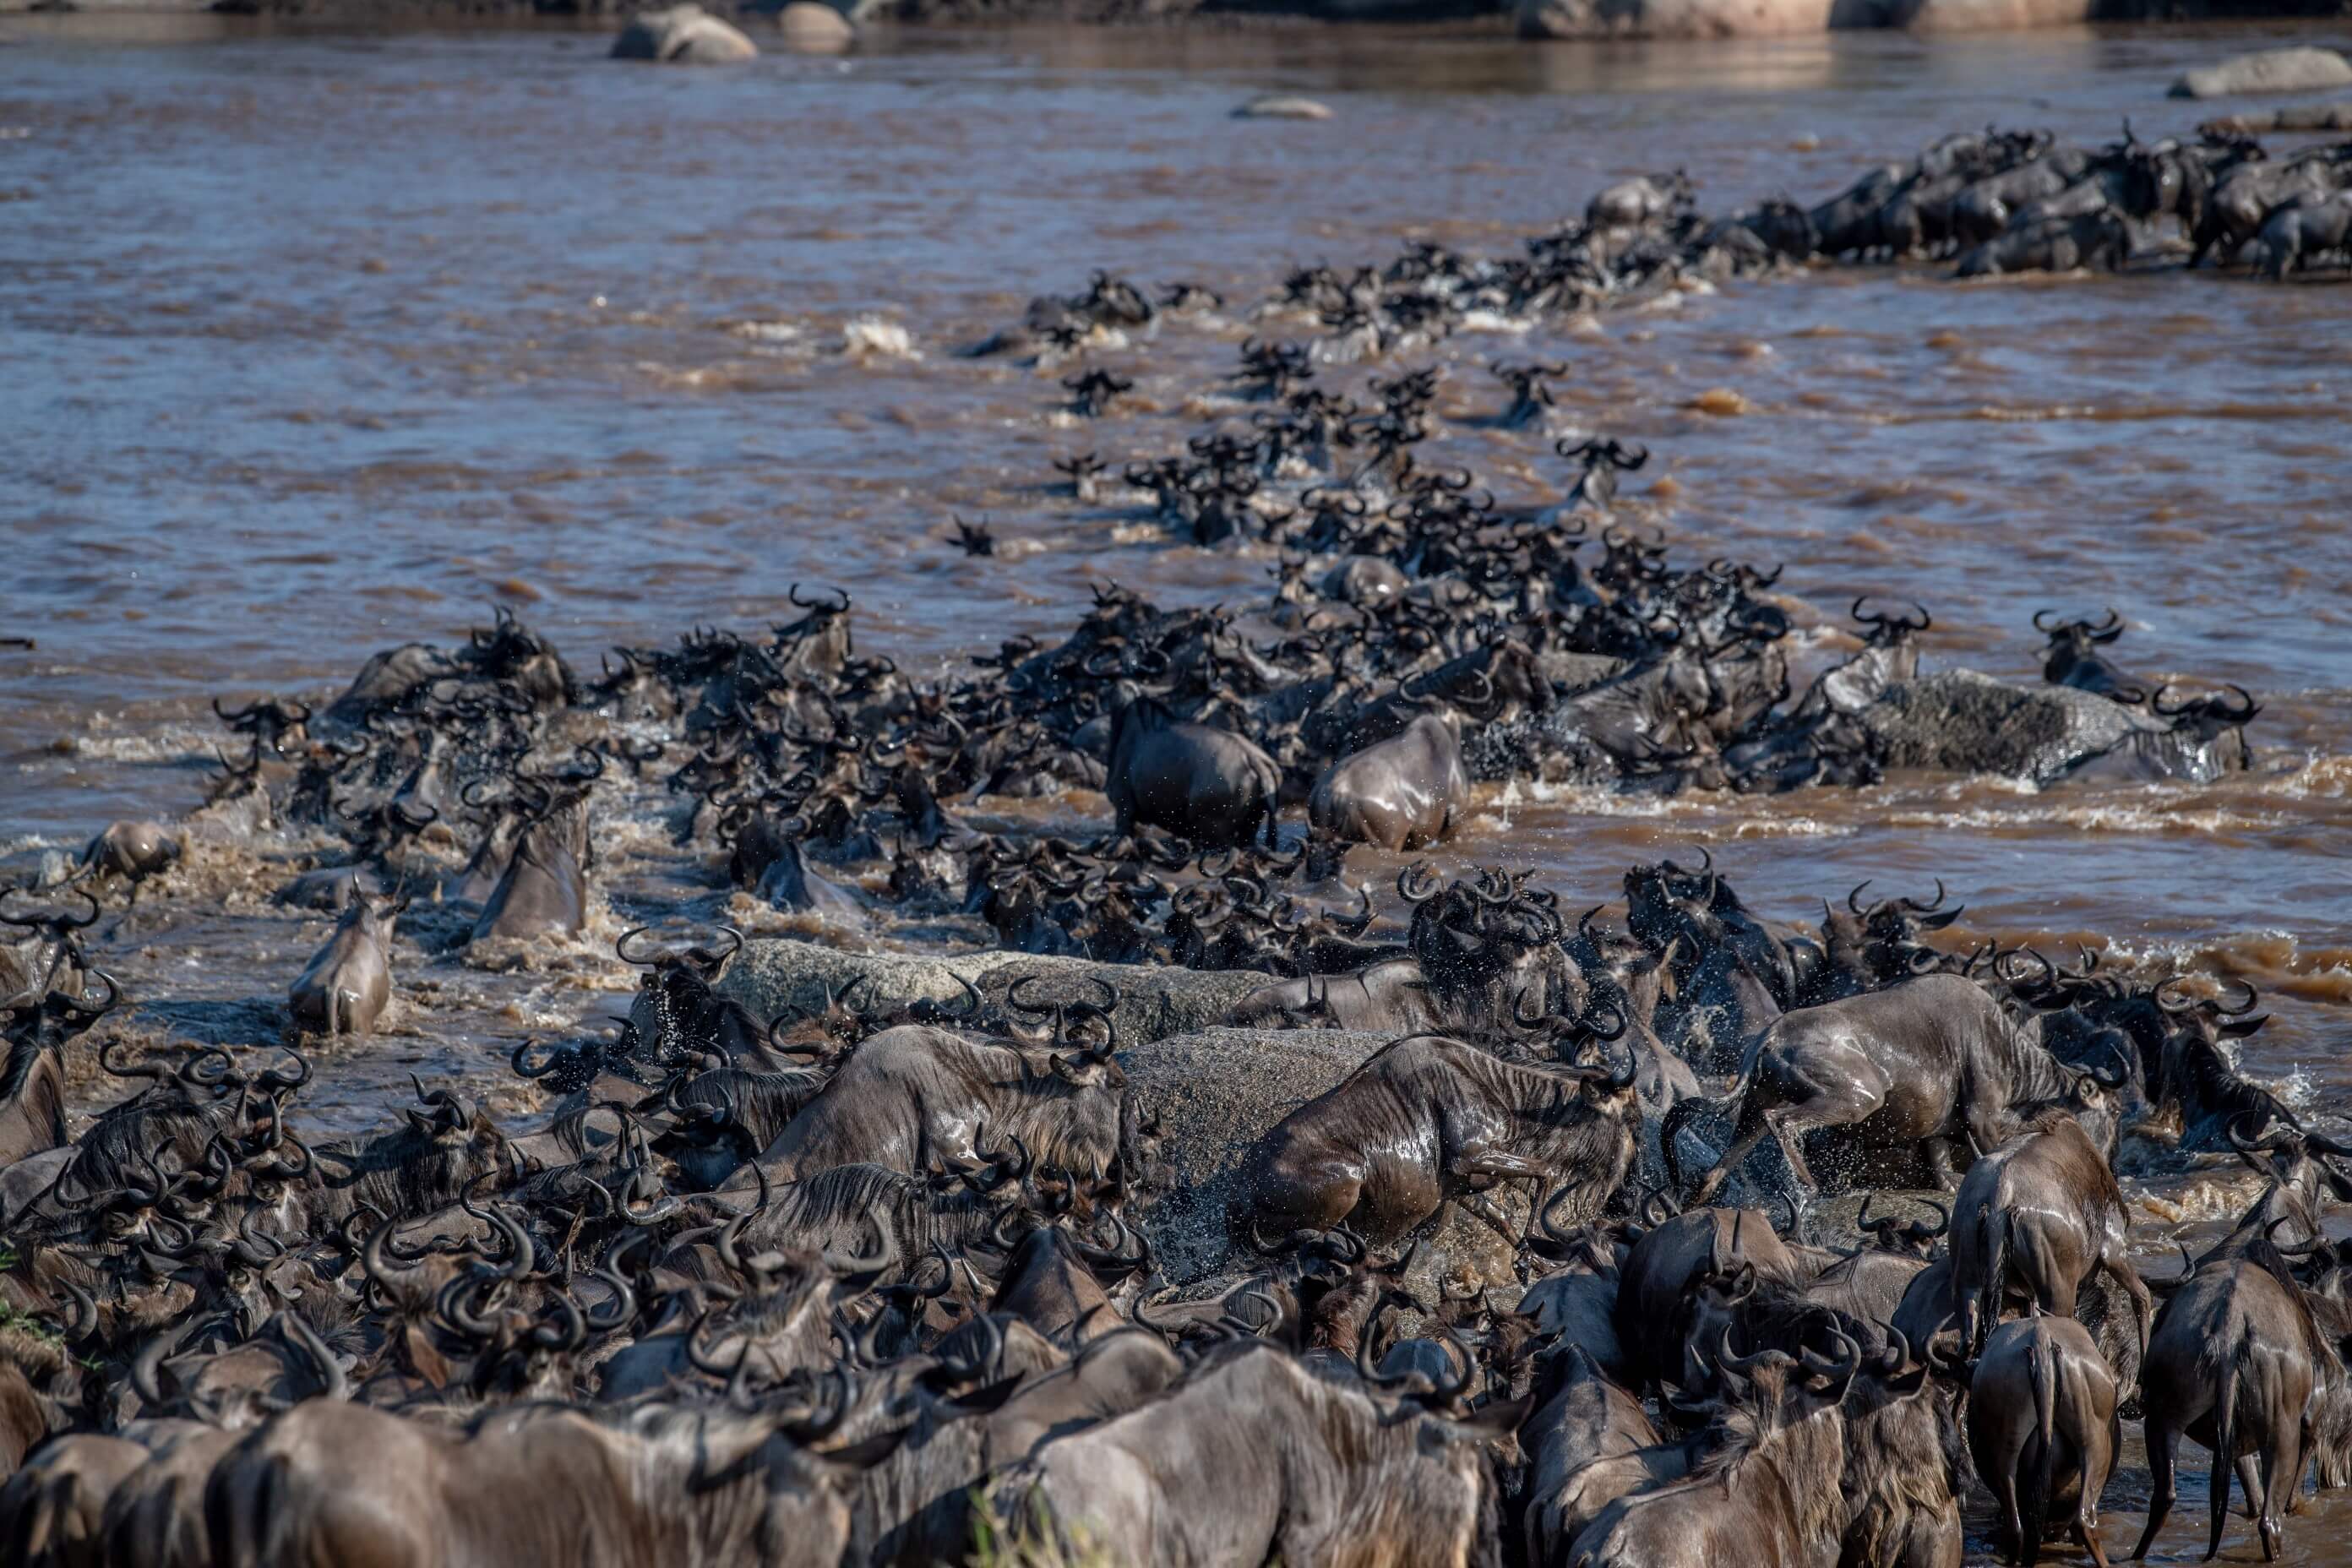 The herds of wildebeest cross rivers teeming with hungry crocodiles